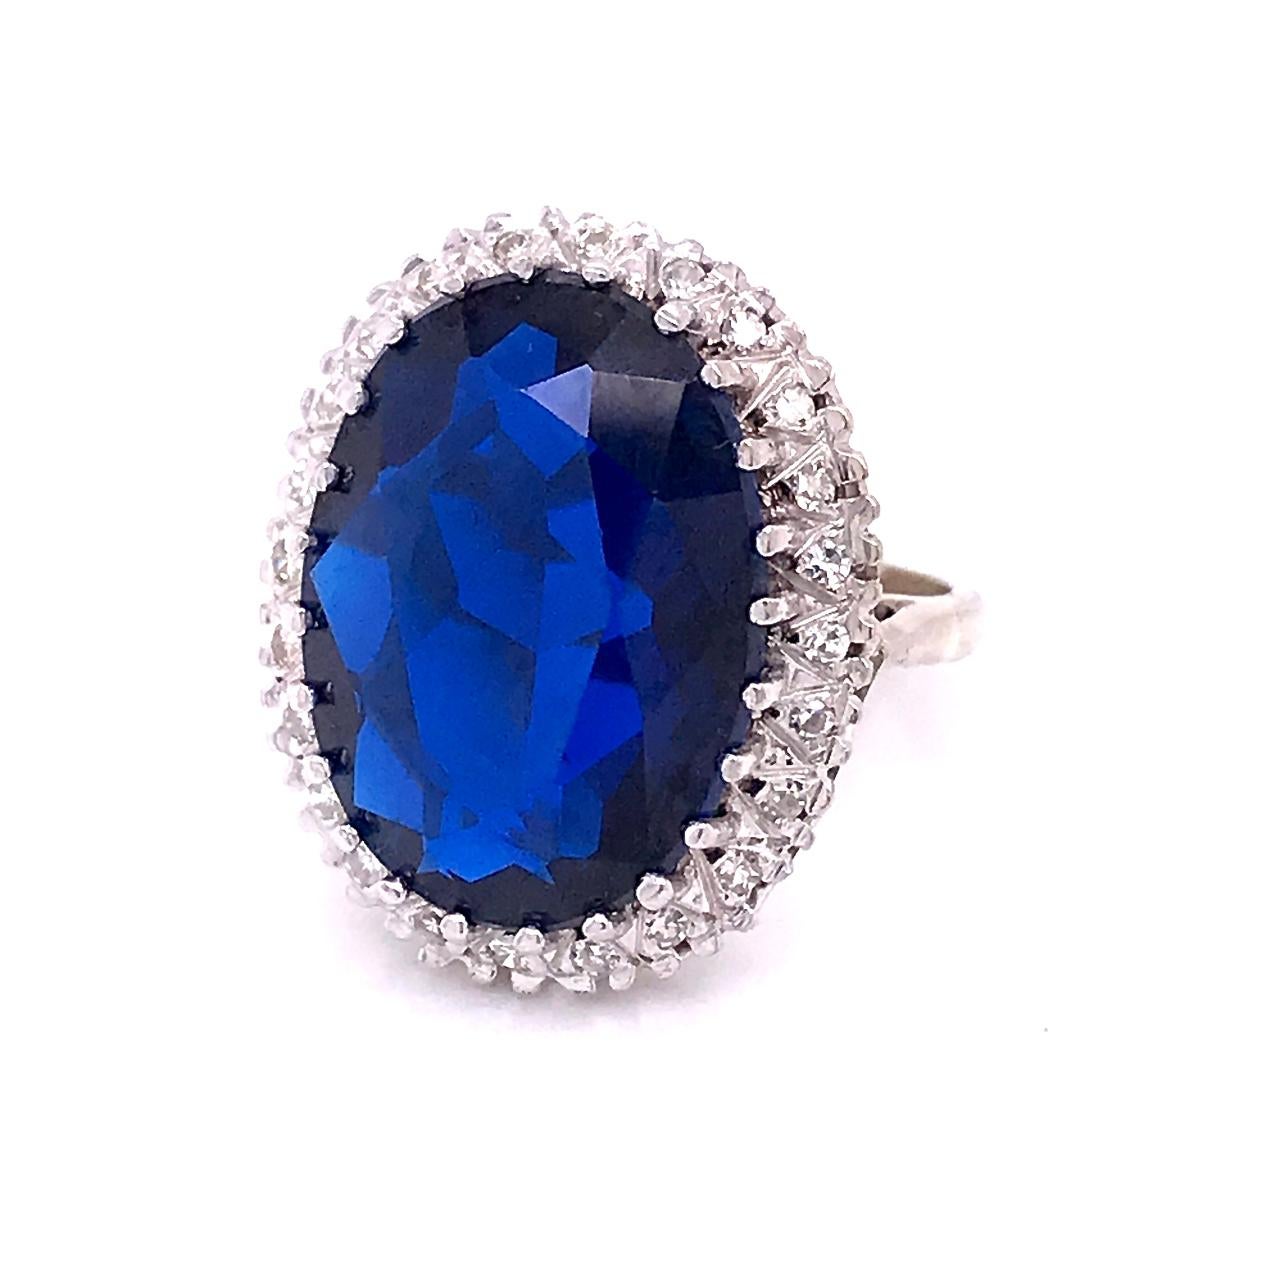 A very fine gold and multi-gemstone cocktail ring.

In 14k white gold. 

Set with a large deep blue oval-cut topaz surrounded by a halo of 24 small round-cut diamonds.

Simply an eye-catching ring that is fun to wear and makes you